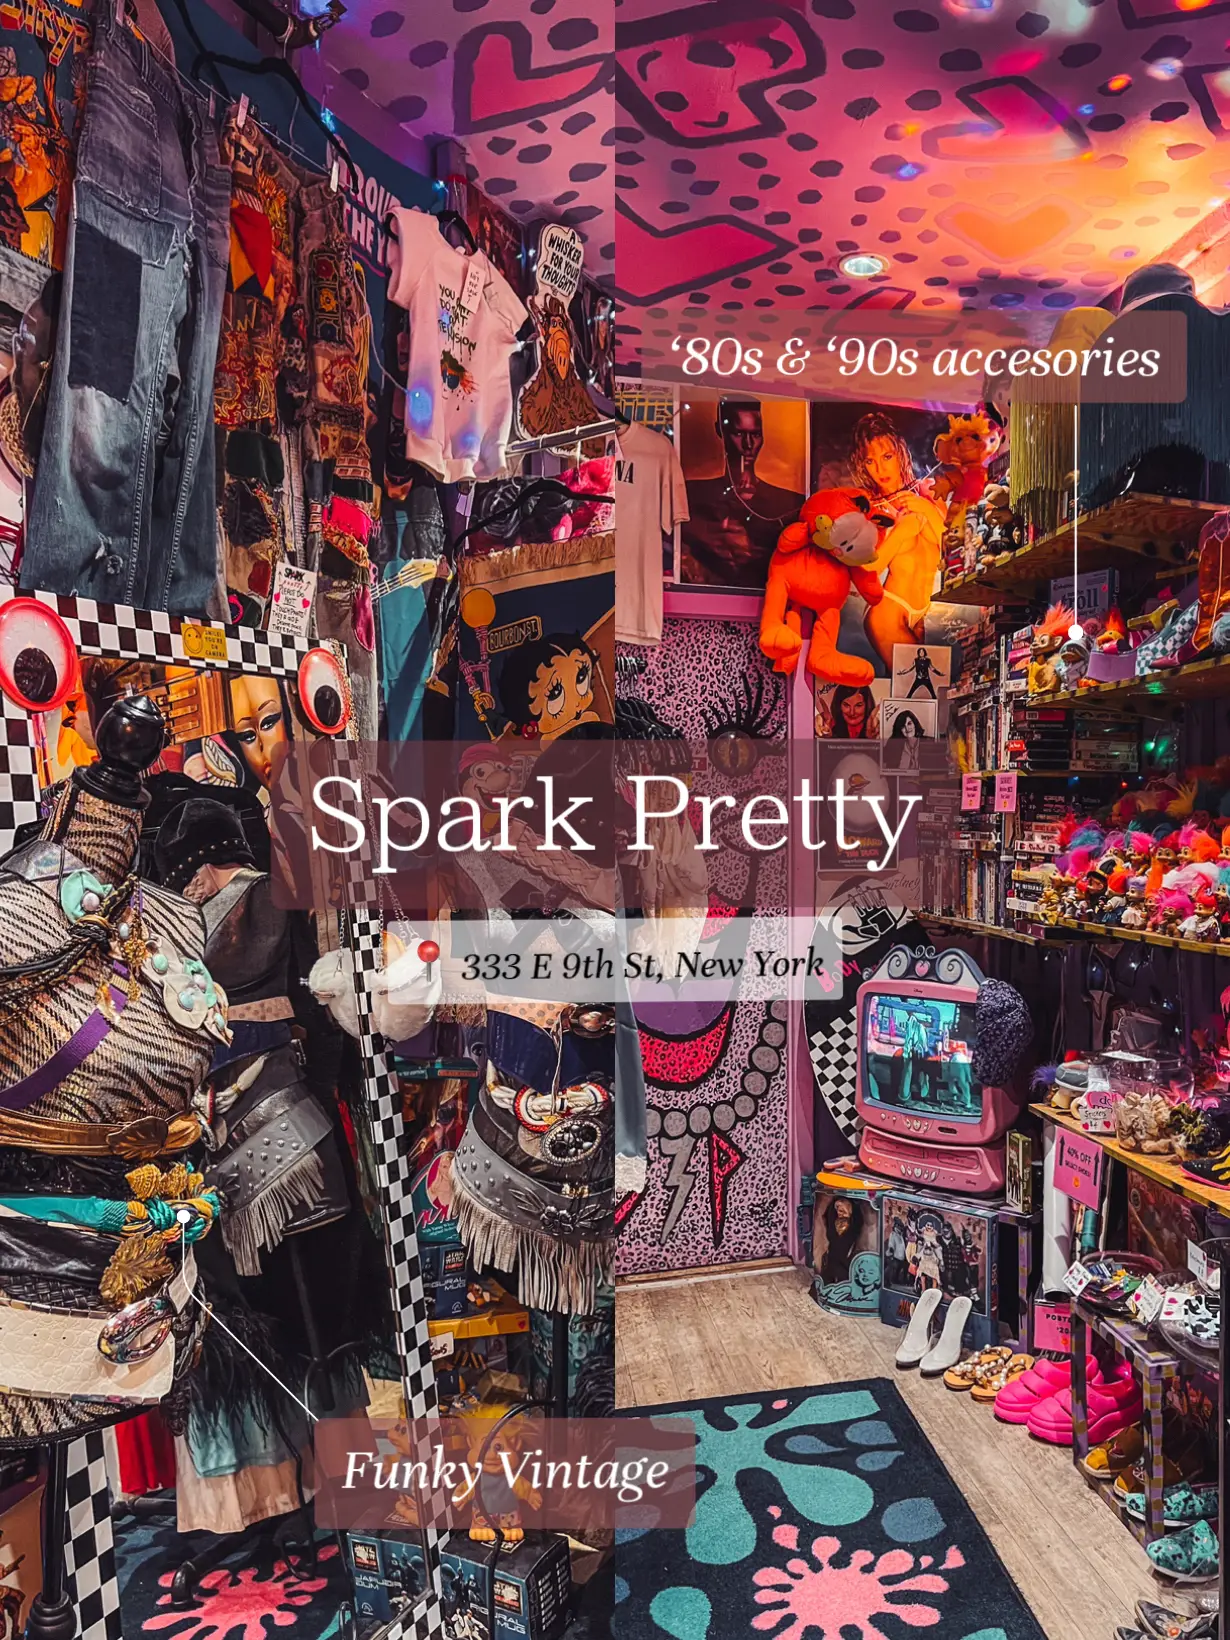  A room full of colorful stuff with the words "Spark Pretty" and "Funky Vintage".